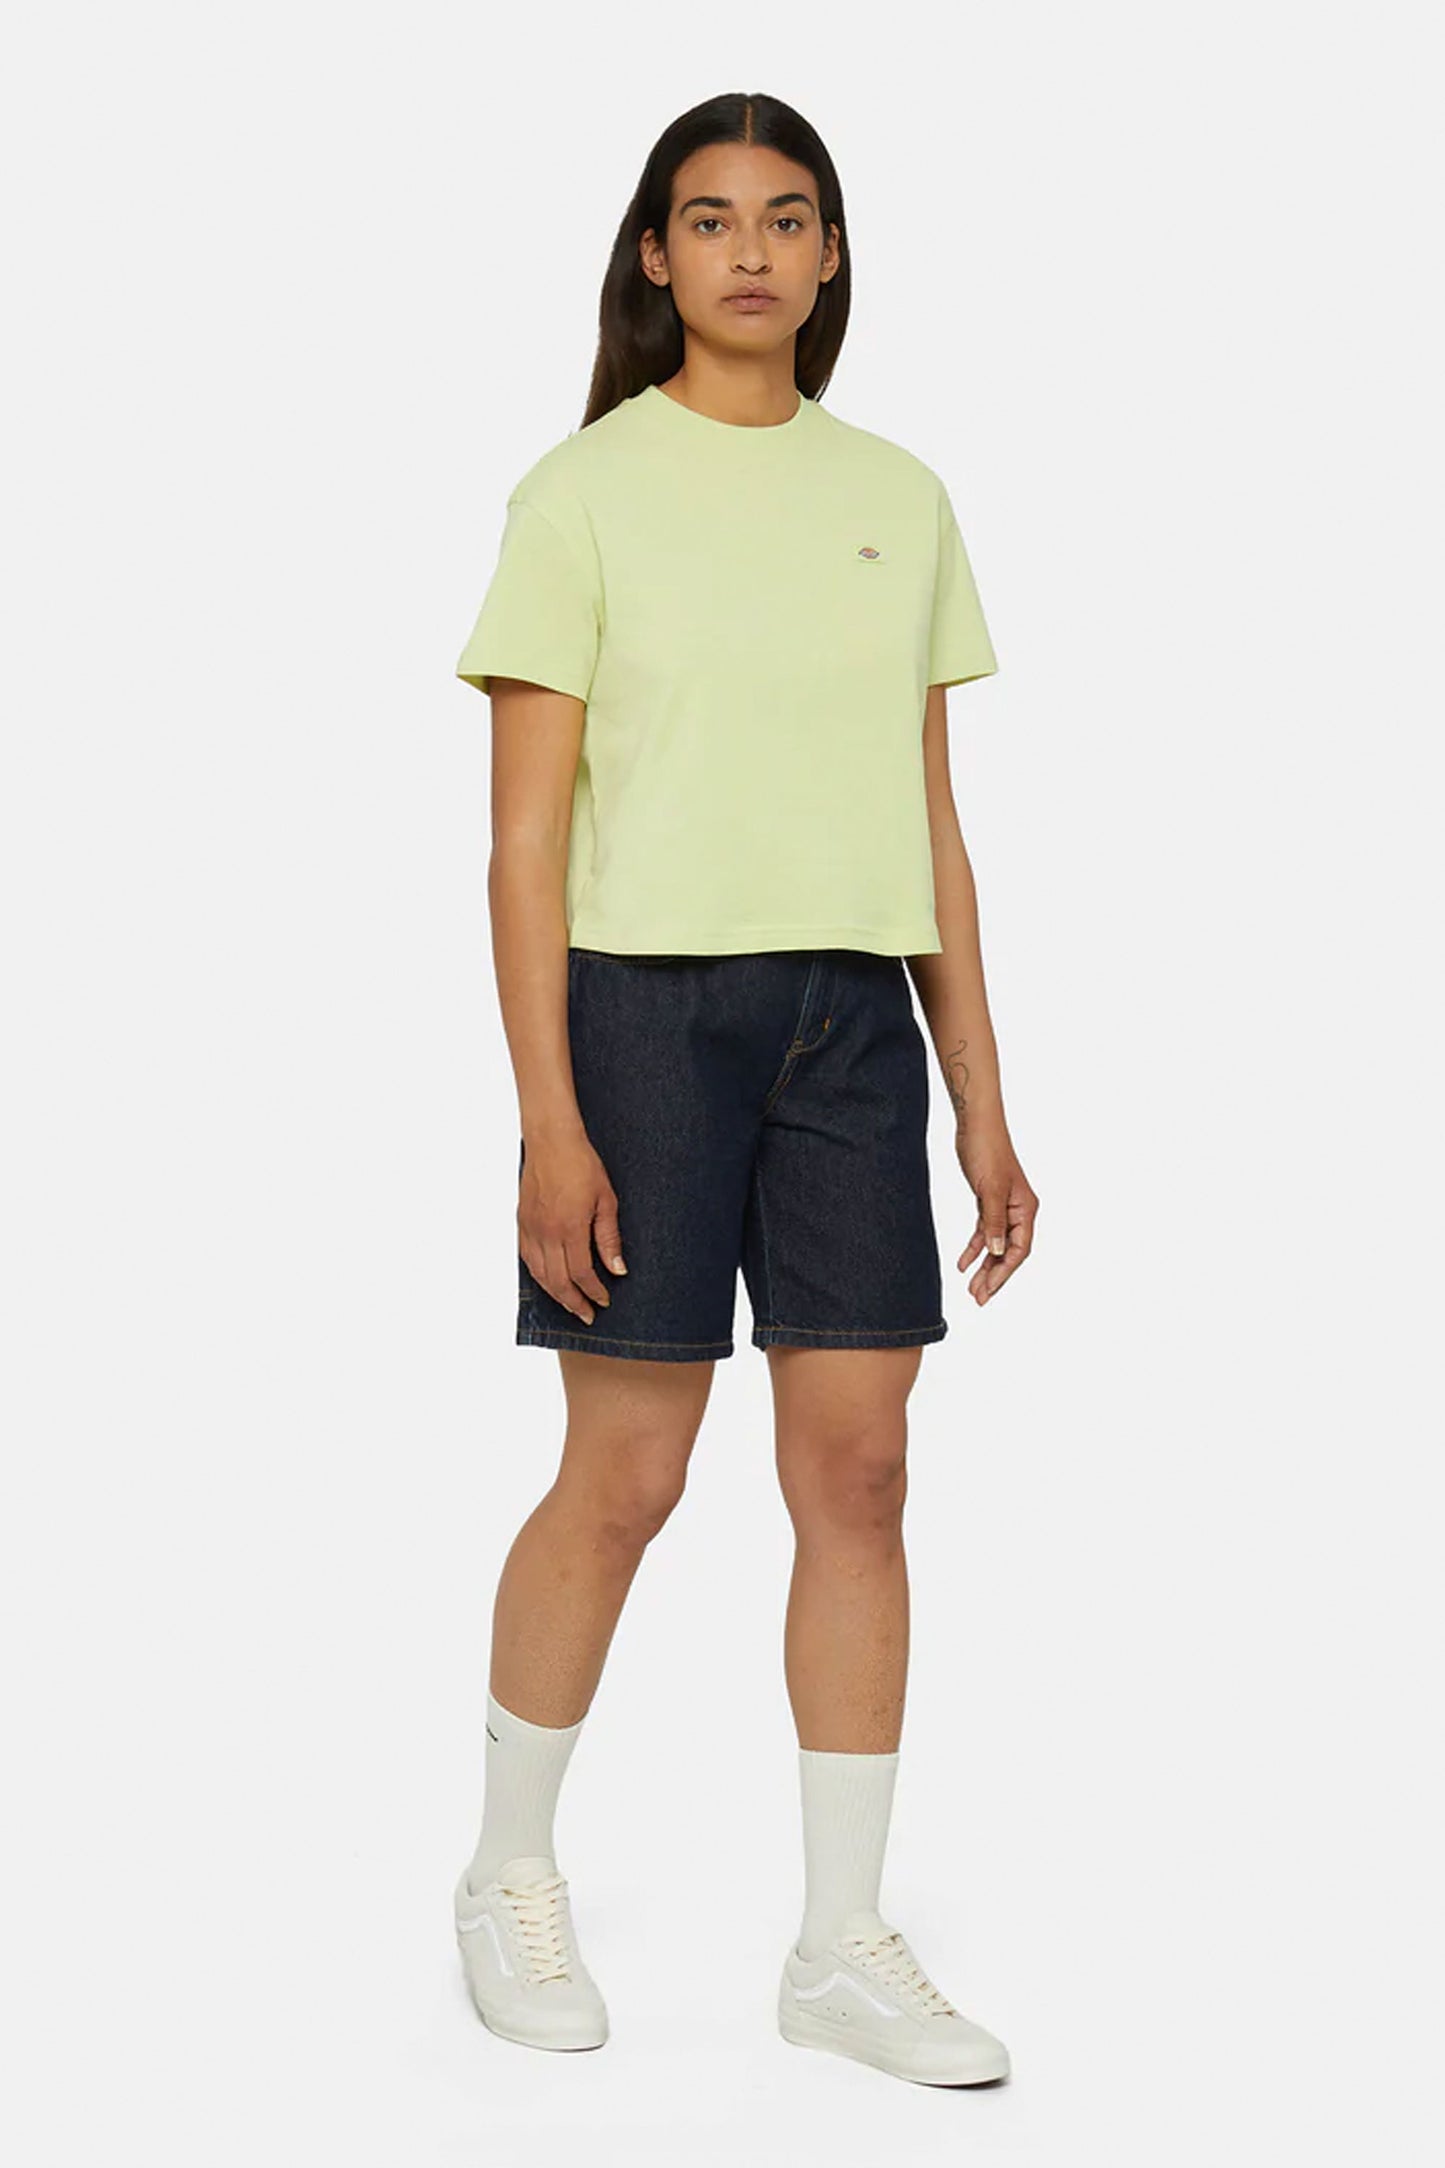 
                  
                    PUKAS-SURF-SHOP-WOMAN-TEE-DICKIES-OAKPORT-BOXY
                  
                